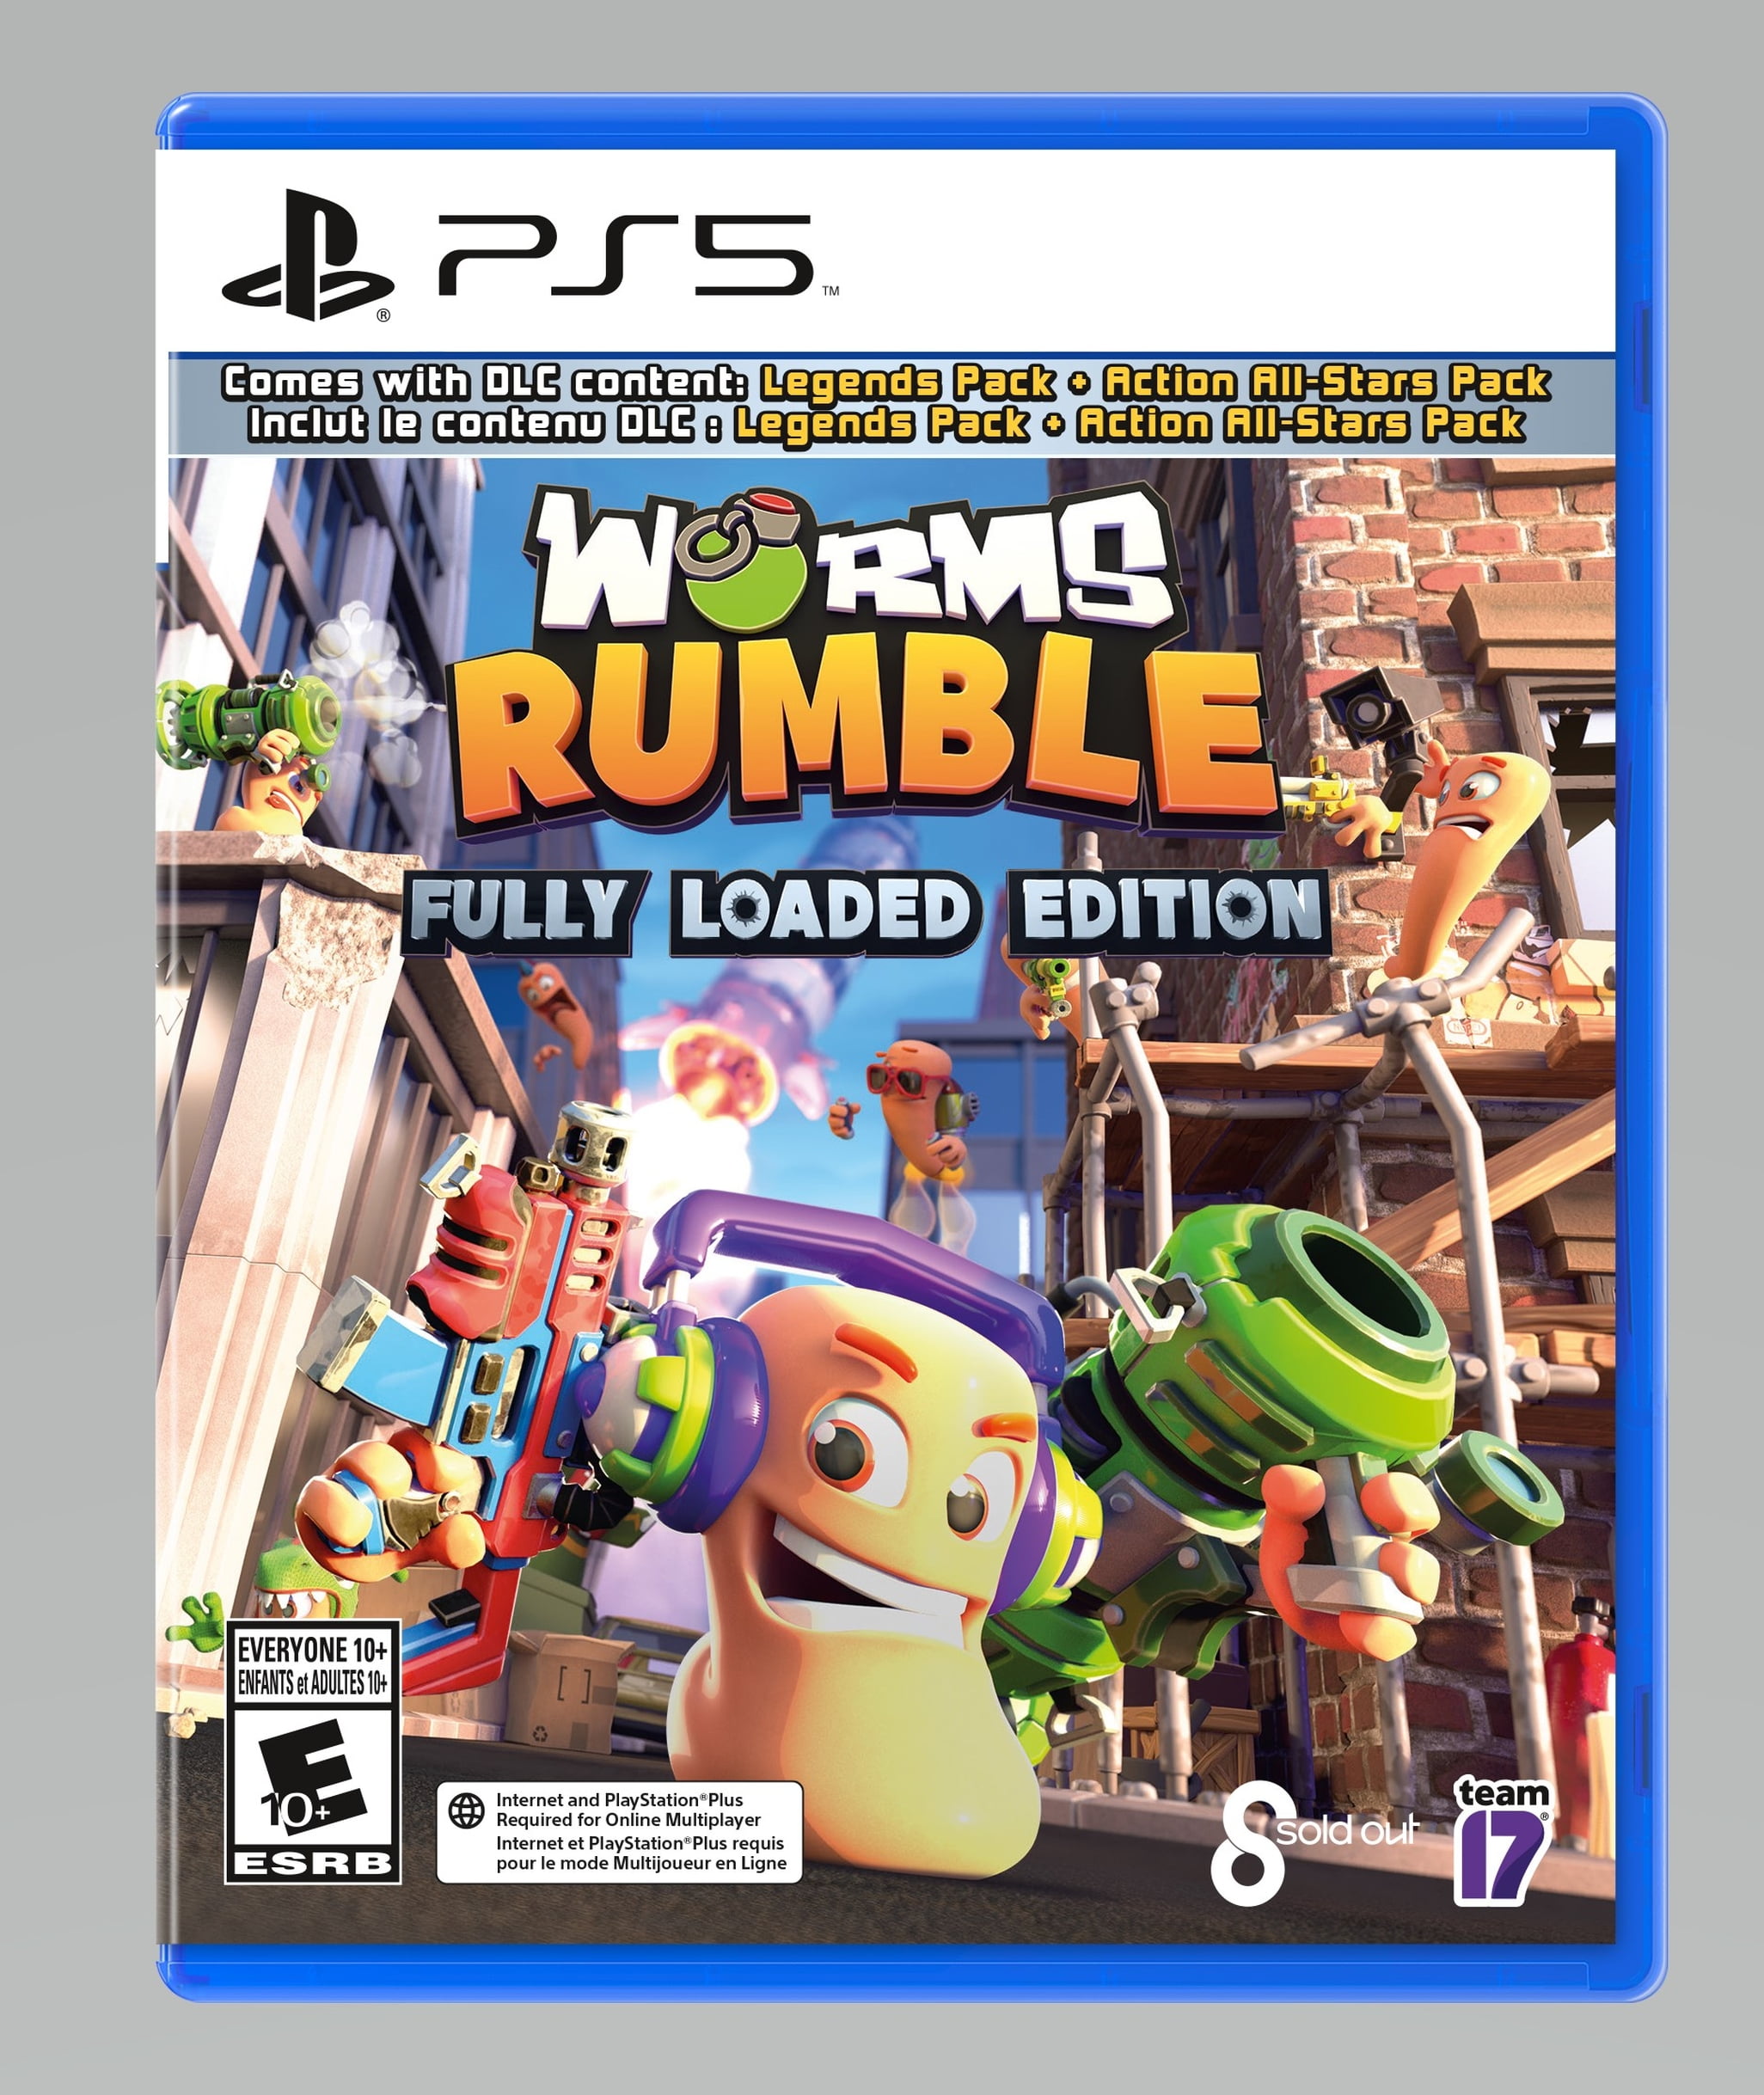 Fully Out, 812303015823 Loaded Worms 5, Edition, Sold Rumble: PlayStation